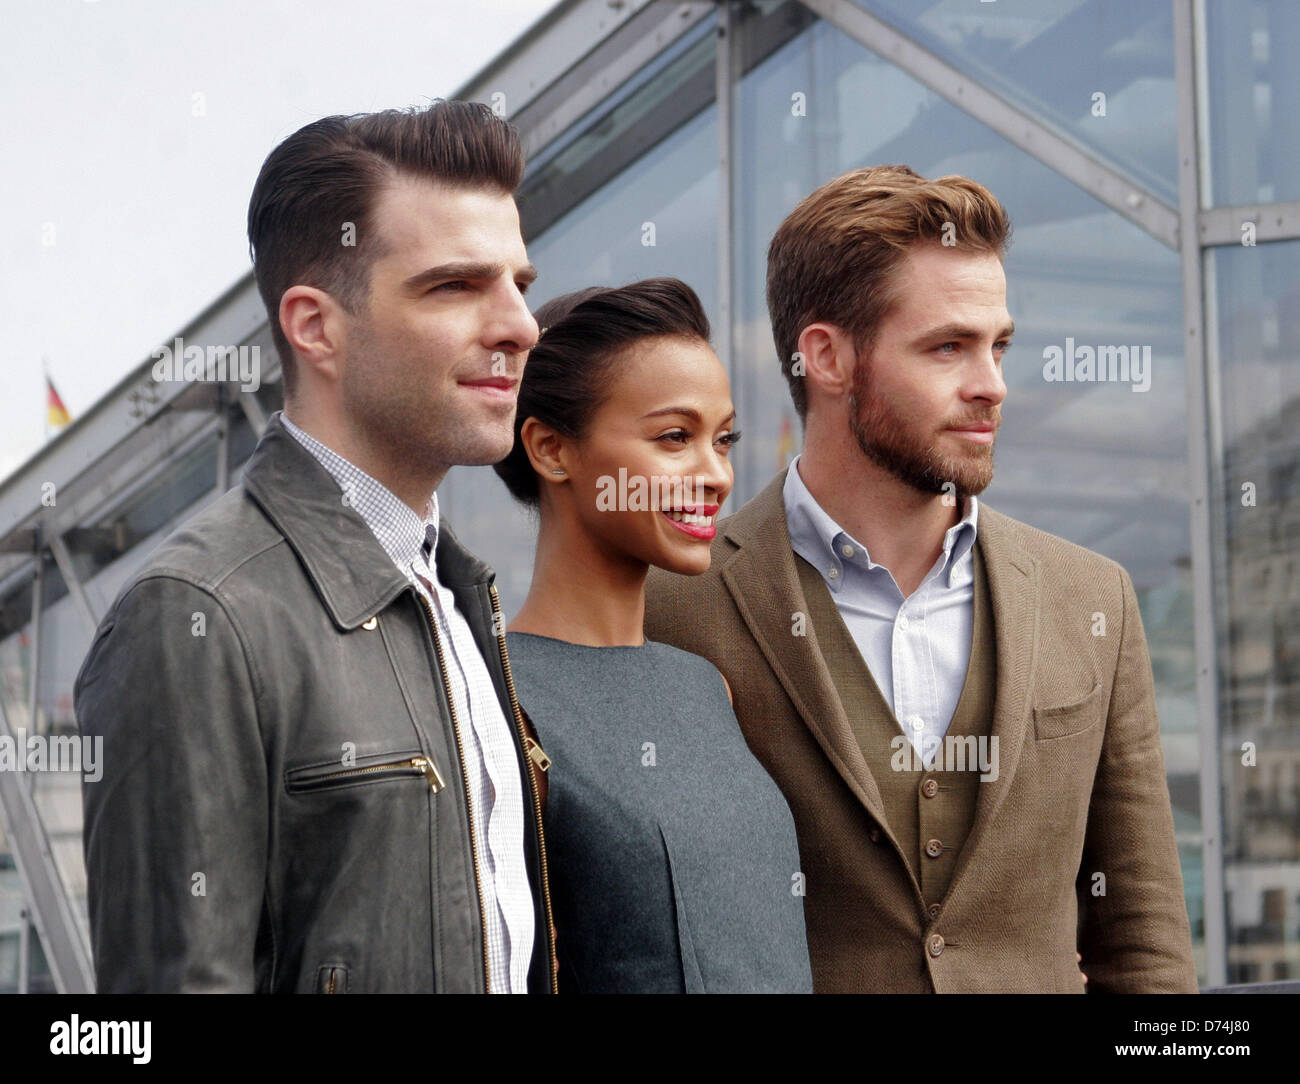 Berlin, Germany. 28th April, 2013. Actors Zachary Quinto (USA, L), Zoe Saldana (USA) and Chris Pine (USA) pose during the presentation of the movie 'Star Trek Into Darkness' in Berlin, Germany, 28 April 2013. The film will be released in Germany on 09 May 2013. Photo: XAMAX/dpa/dpa/Alamy Live News Stock Photo